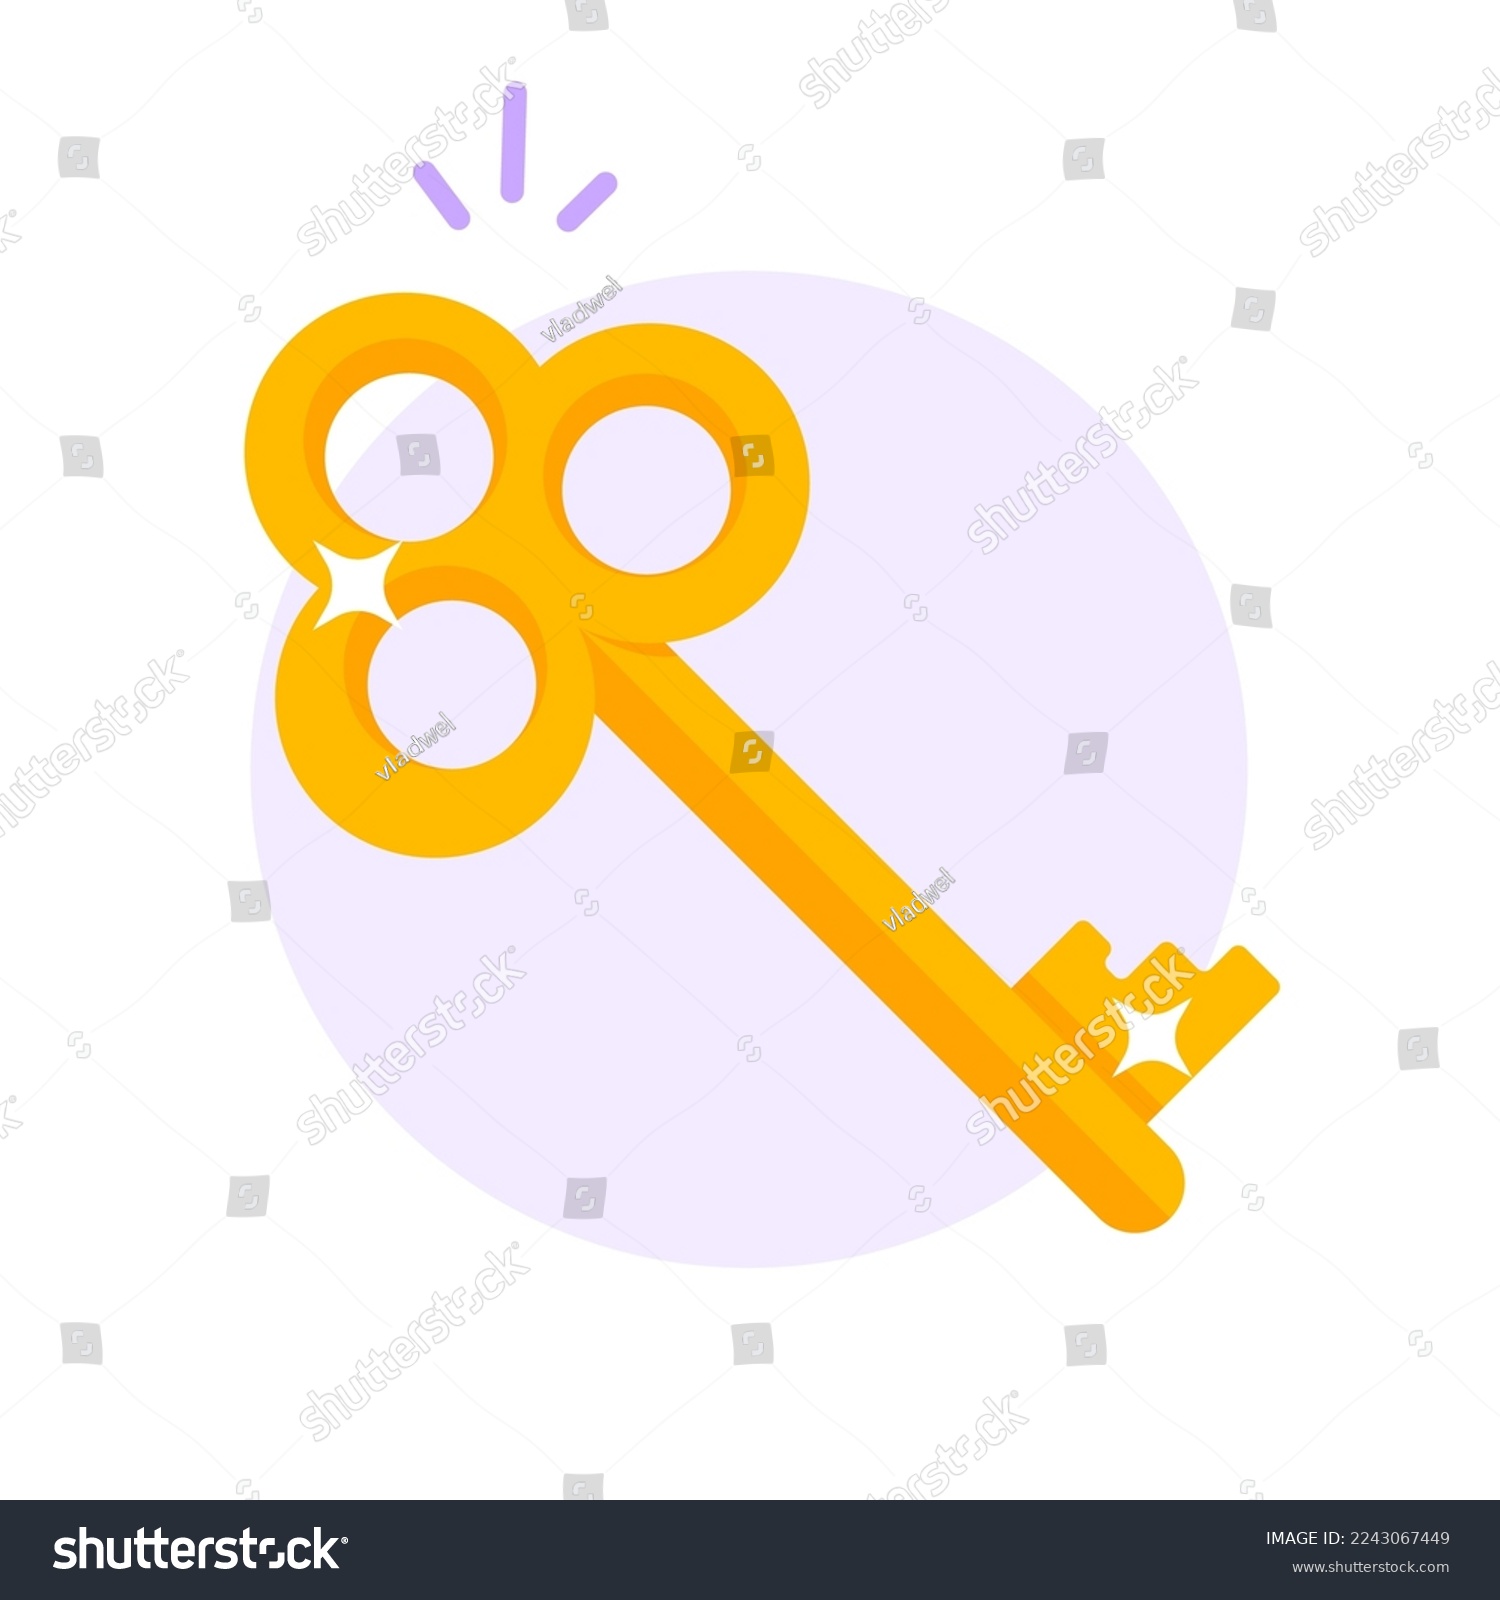 Key gold old icon retro vector modern or antique golden vintage sparkle glitter latchkey yellow color clipart graphic illustration, idea of new shine solution passkey, secret access trendy design  #2243067449